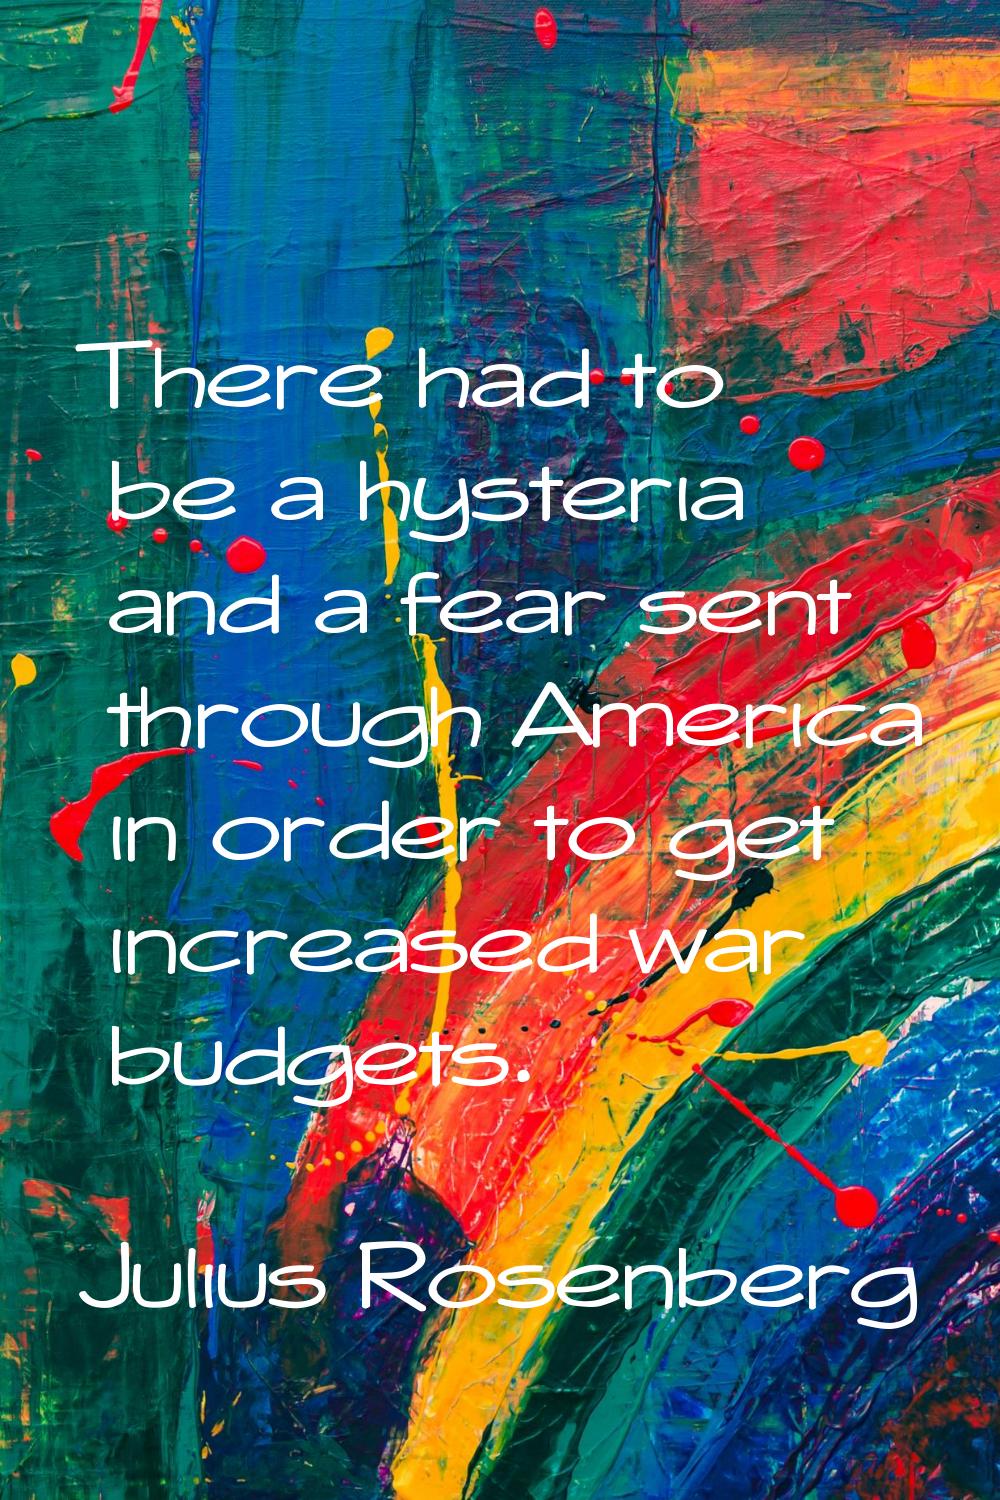 There had to be a hysteria and a fear sent through America in order to get increased war budgets.